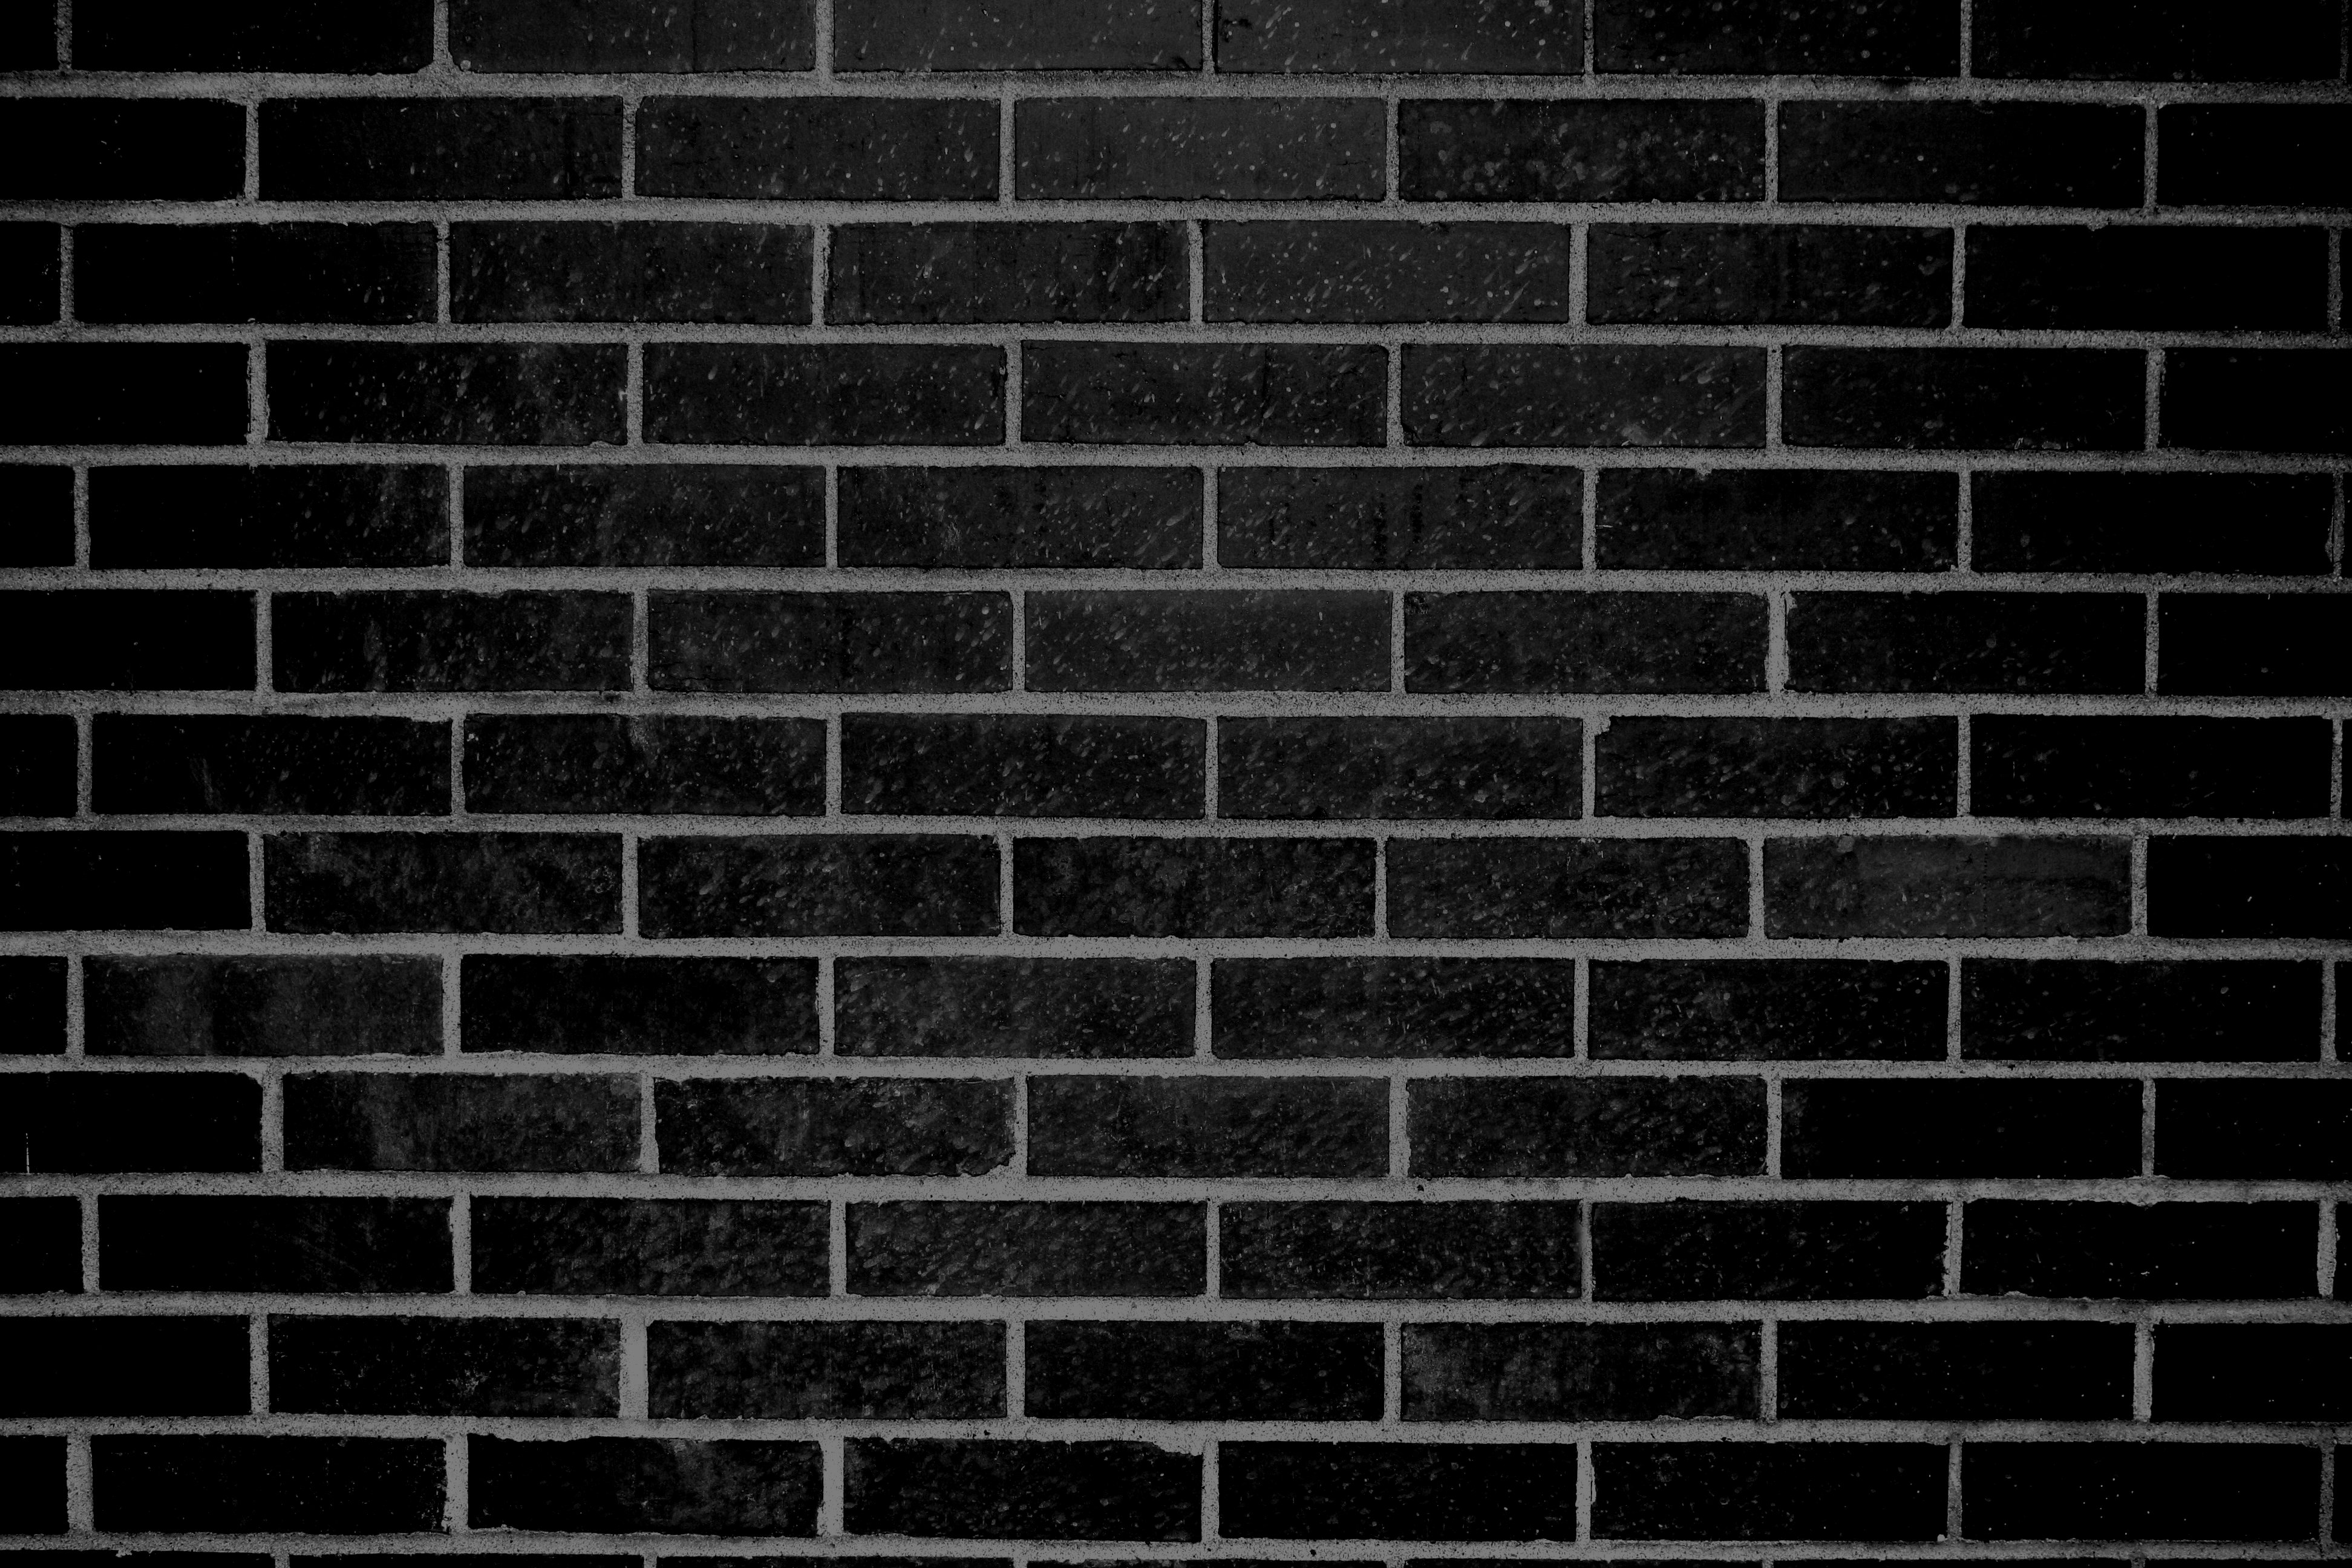 Black Brick Wall Texture Picture.